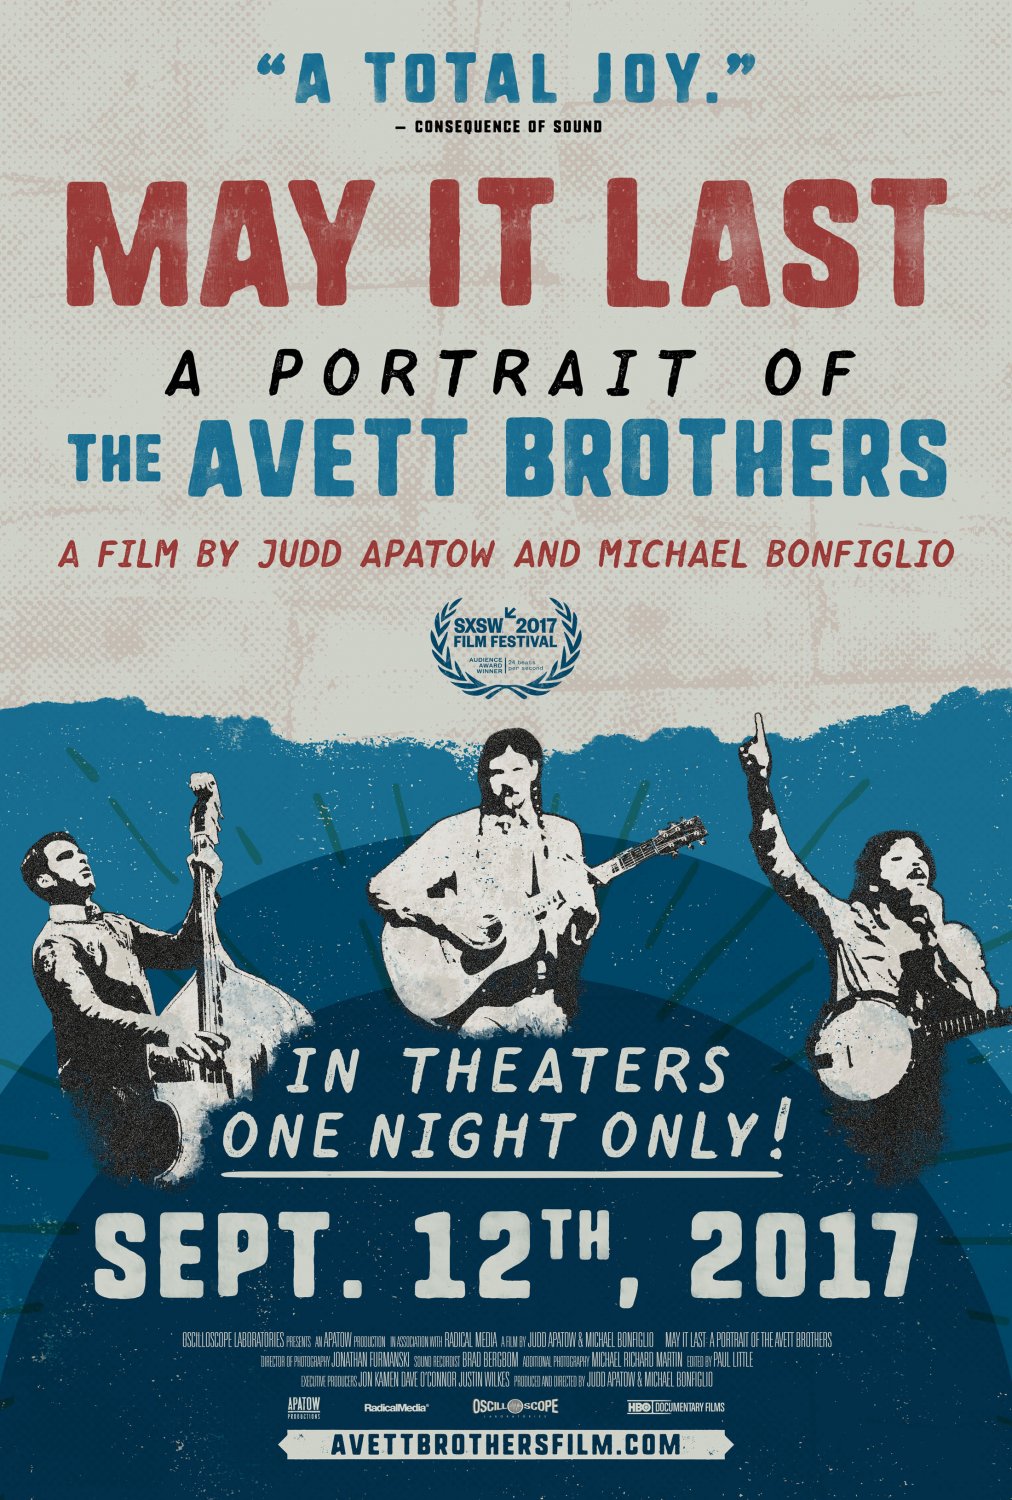 The Avett Brothers May it Last 13"x19" (32cm/49cm) Polyester Fabric Poster